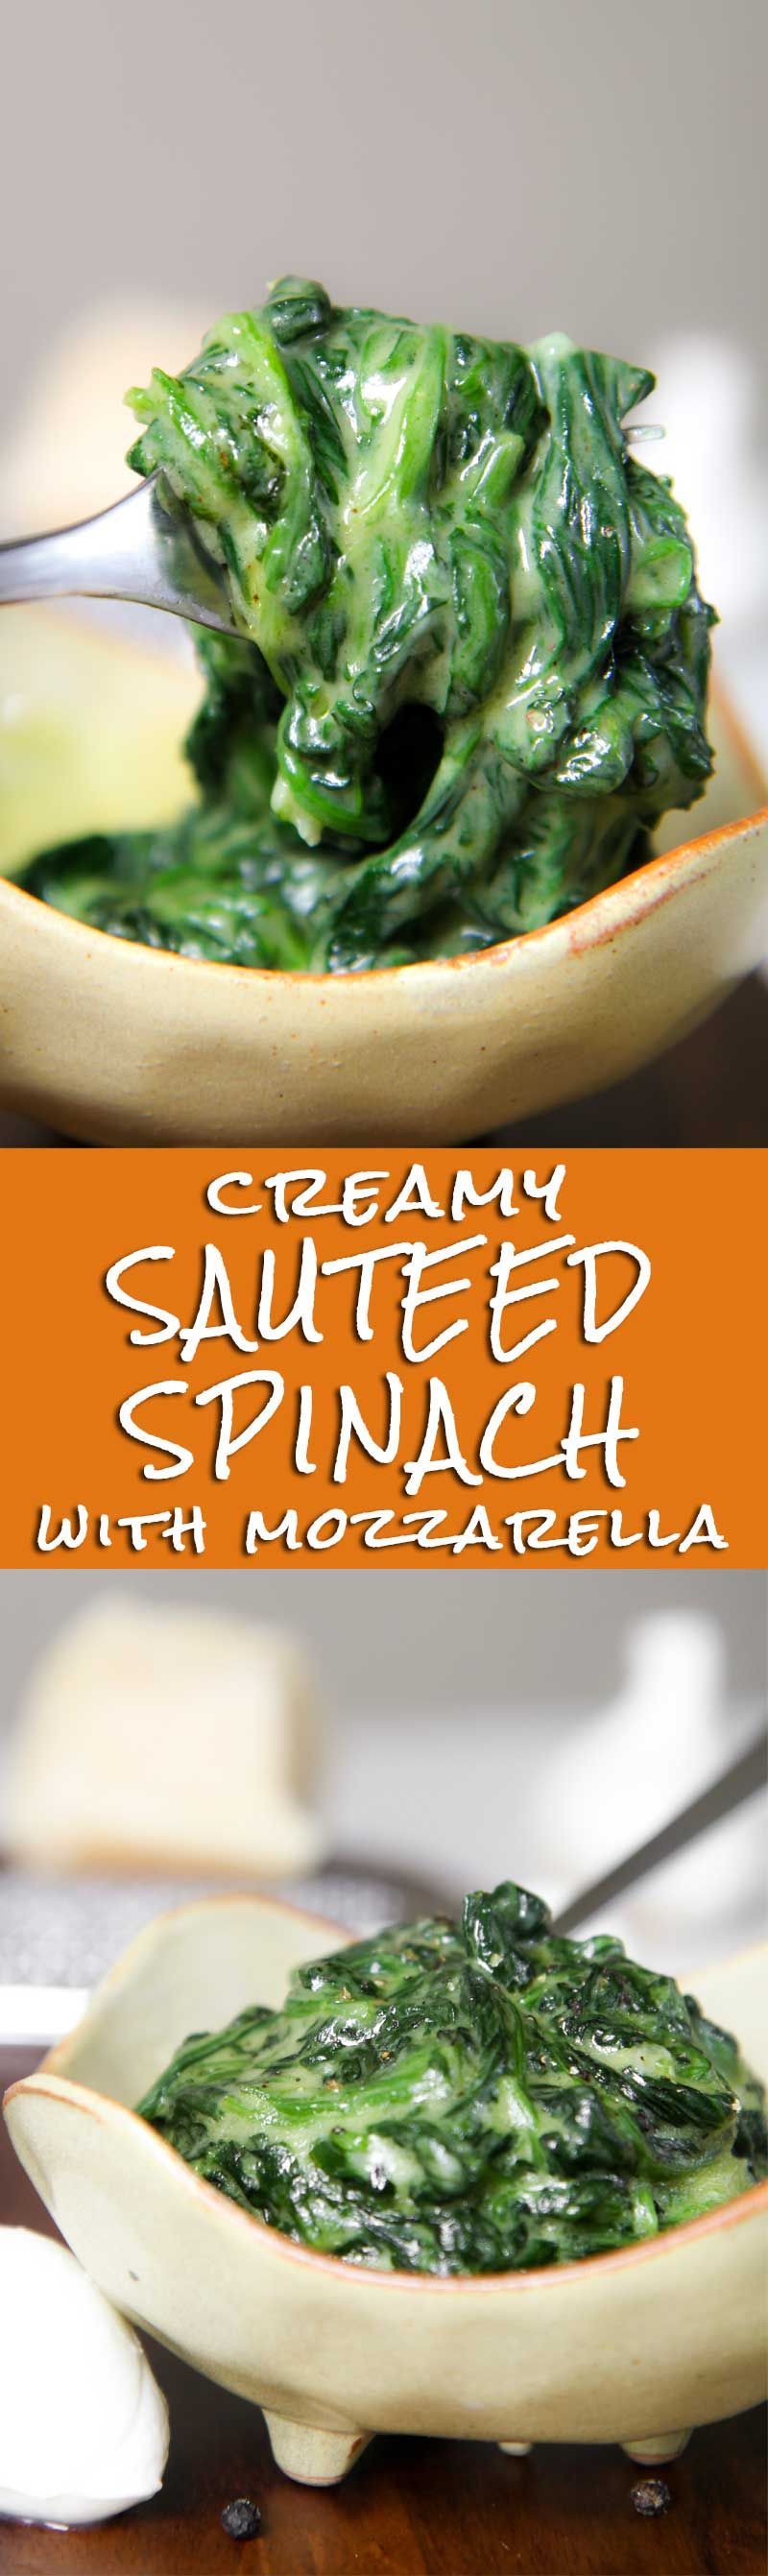 SAUTEED SPINACH AND MOZZARELLA RECIPE – Sauteed spinach combined with fresh mozzarella are perfect paired with eggs and meats. A